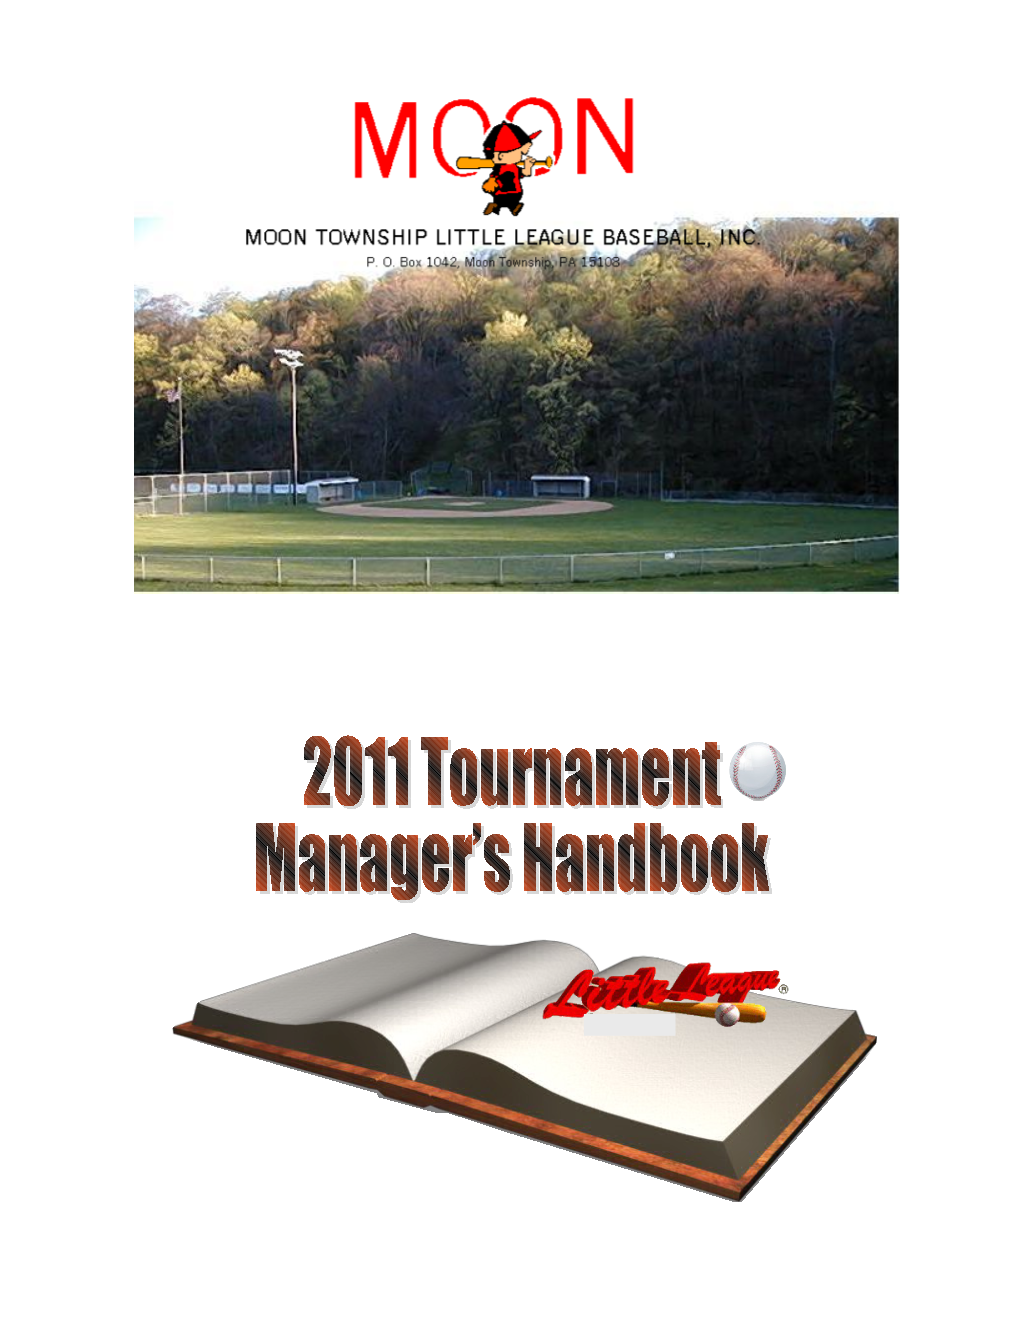 Congratulations on Being Appointed a Tournament Manager with Moon Township Little League